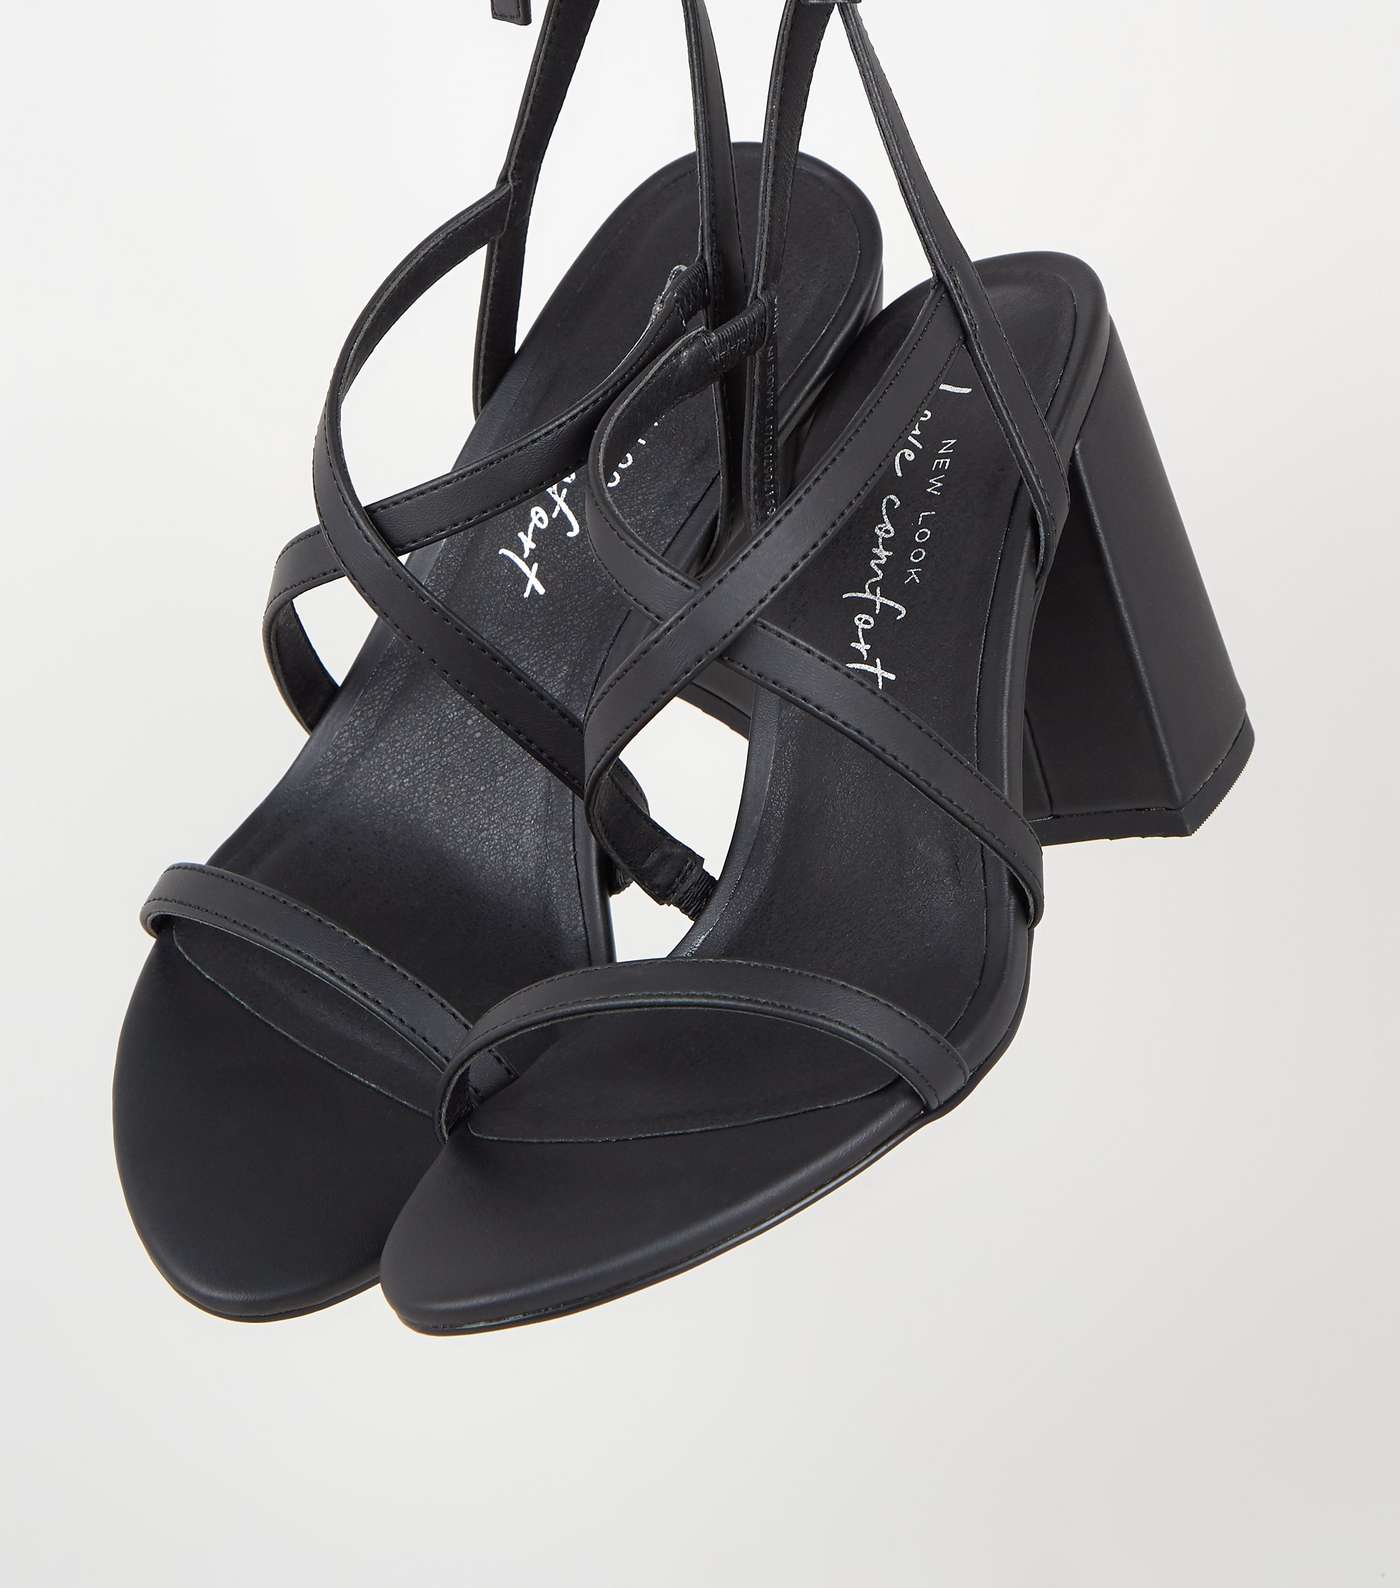 Black Leather-Look Strappy Flared Heel Sandals Image 4